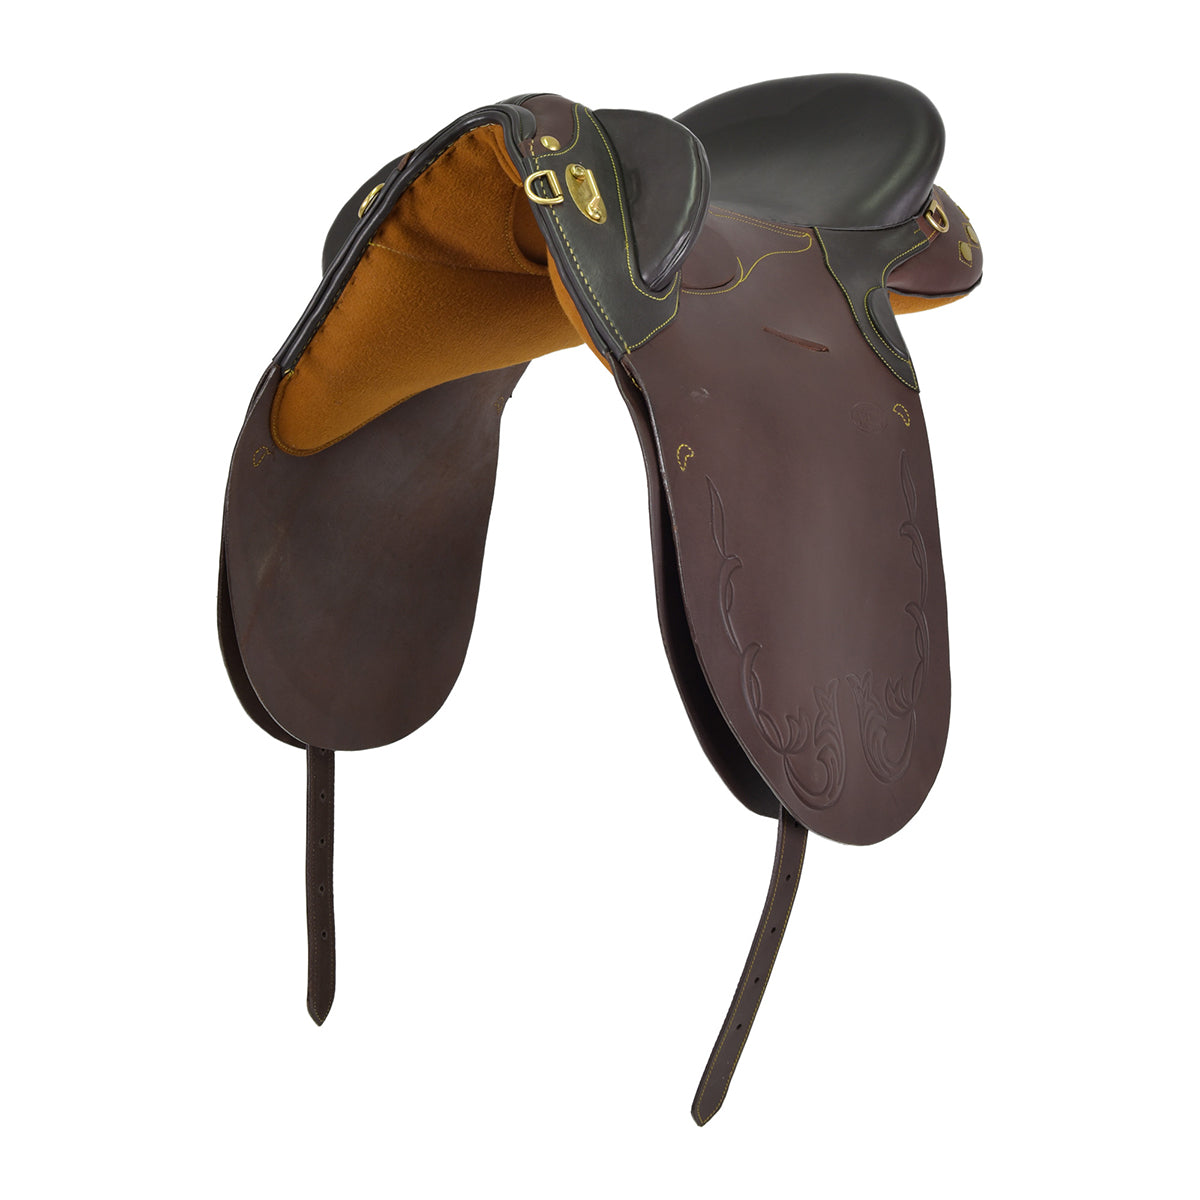 Northern River Drafter Stock Saddle